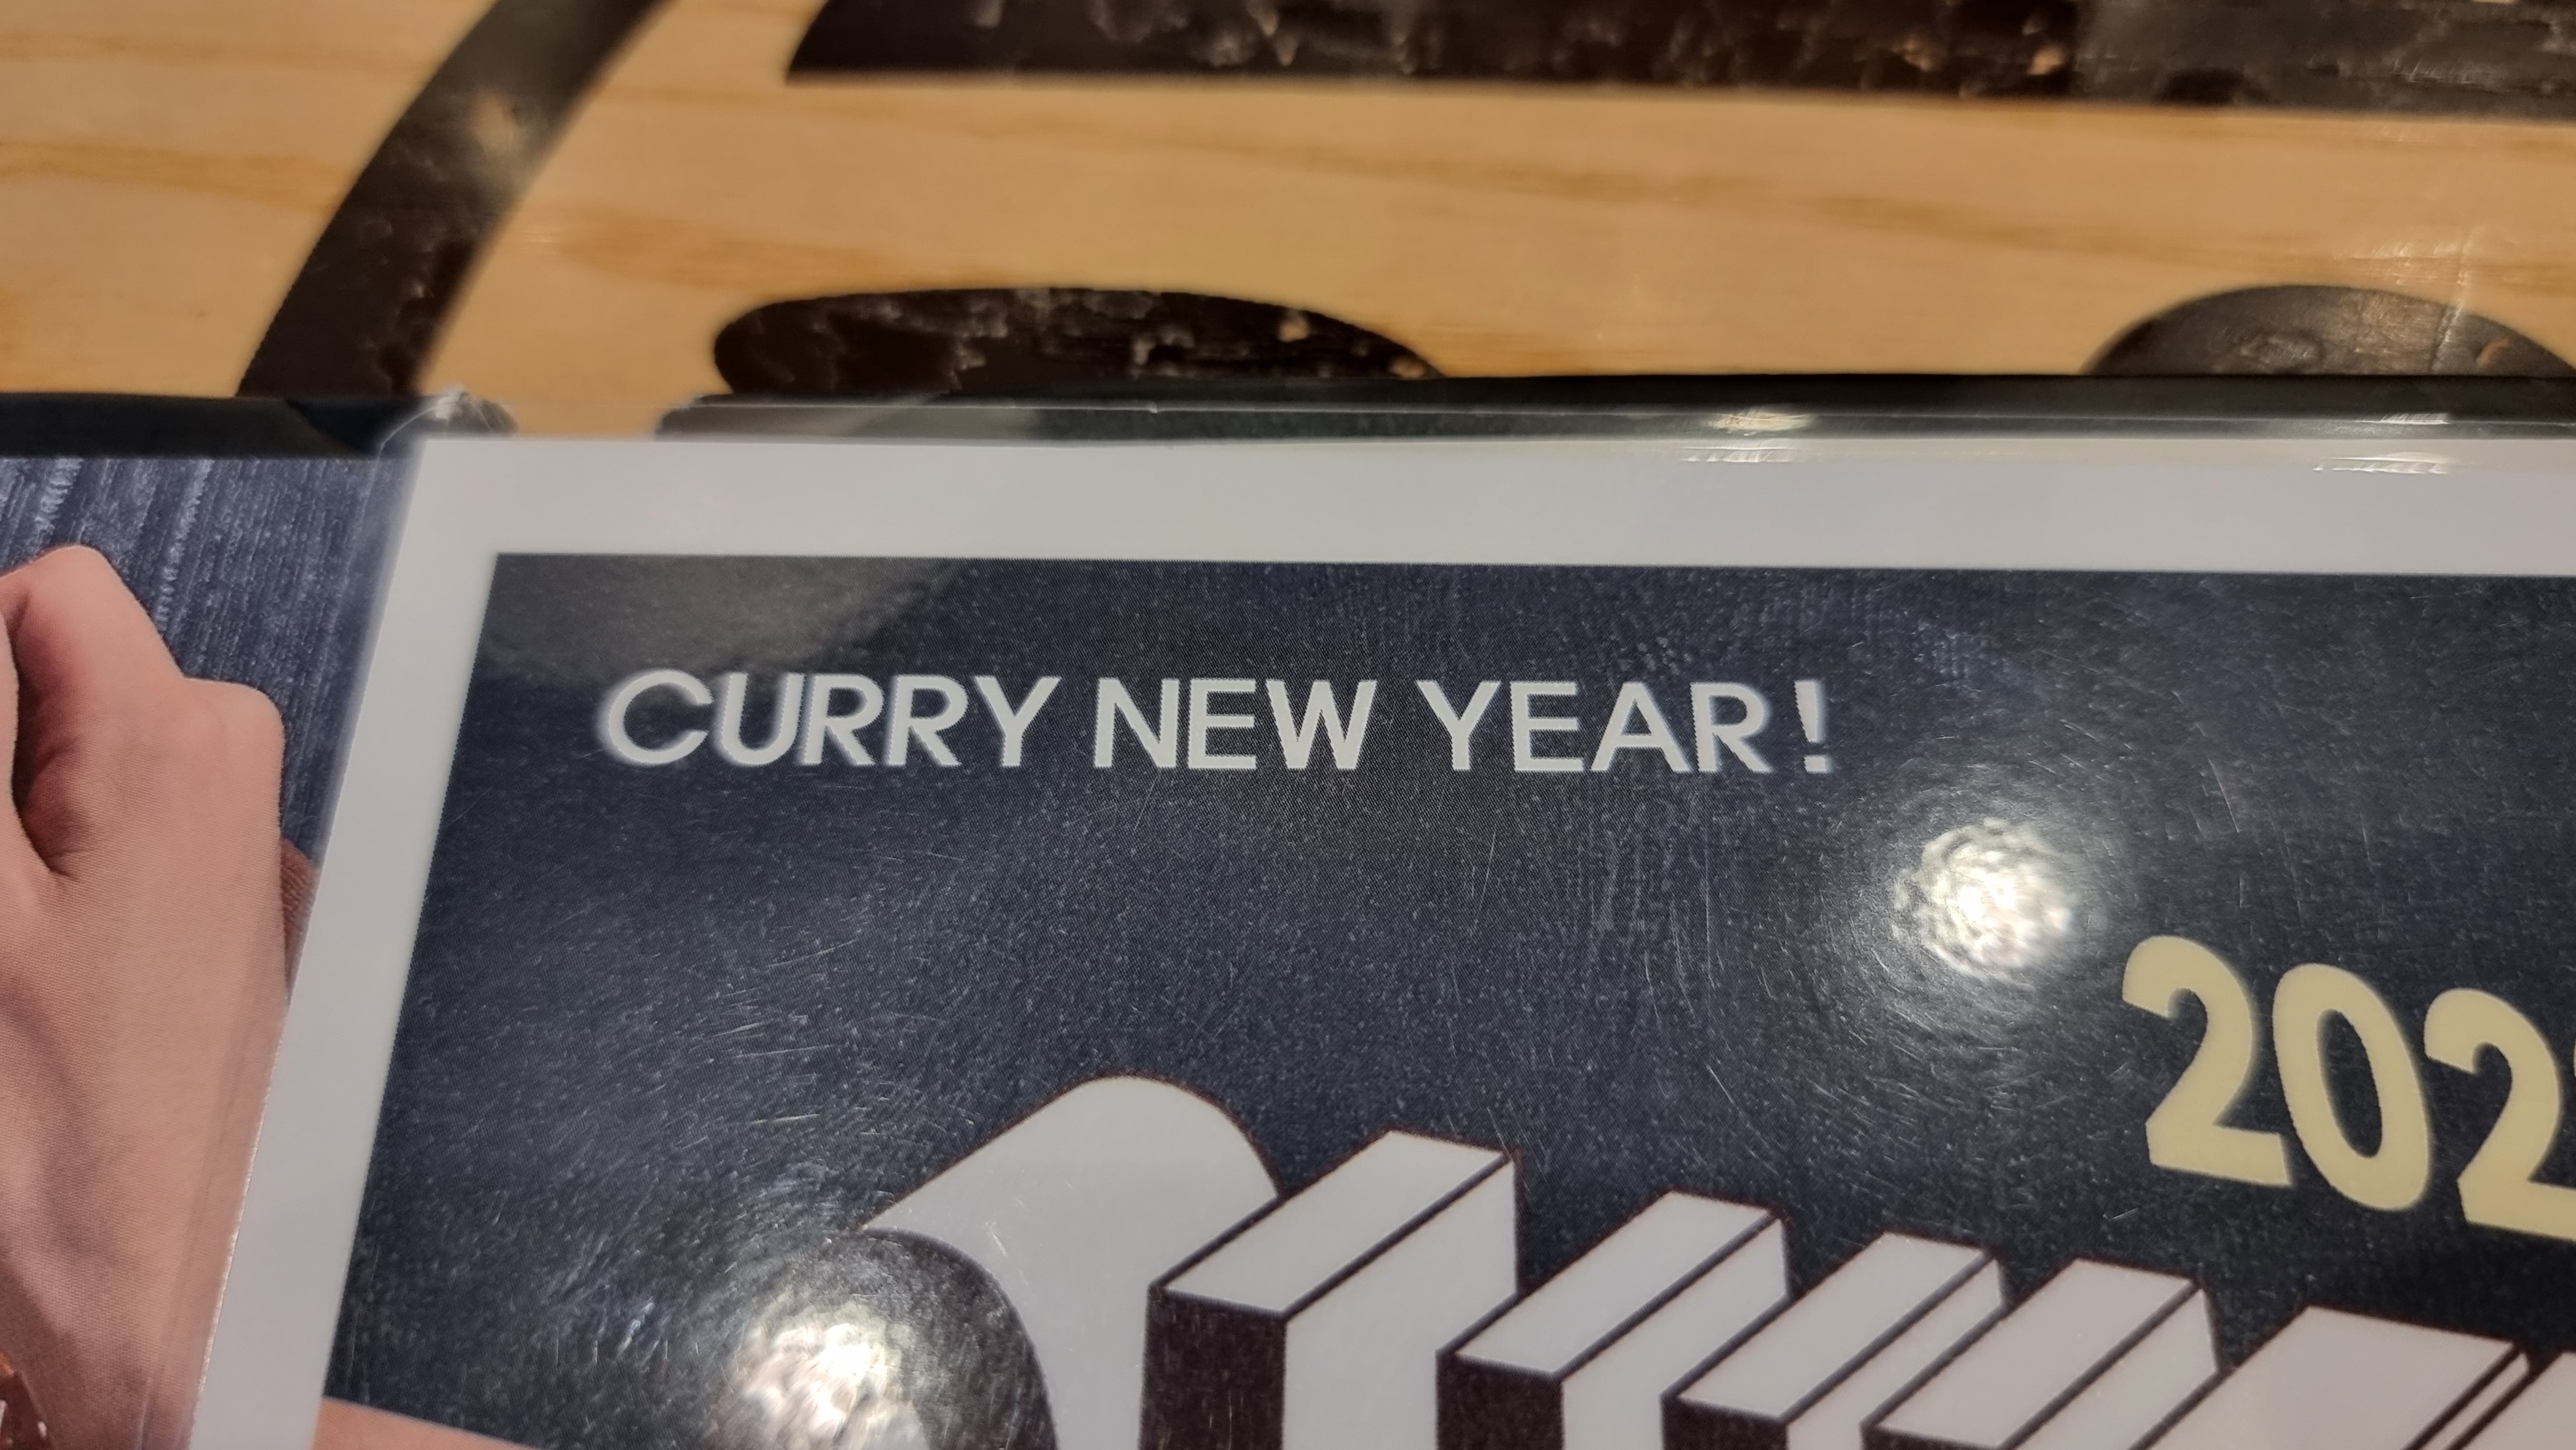 CURRY NEW YEAR